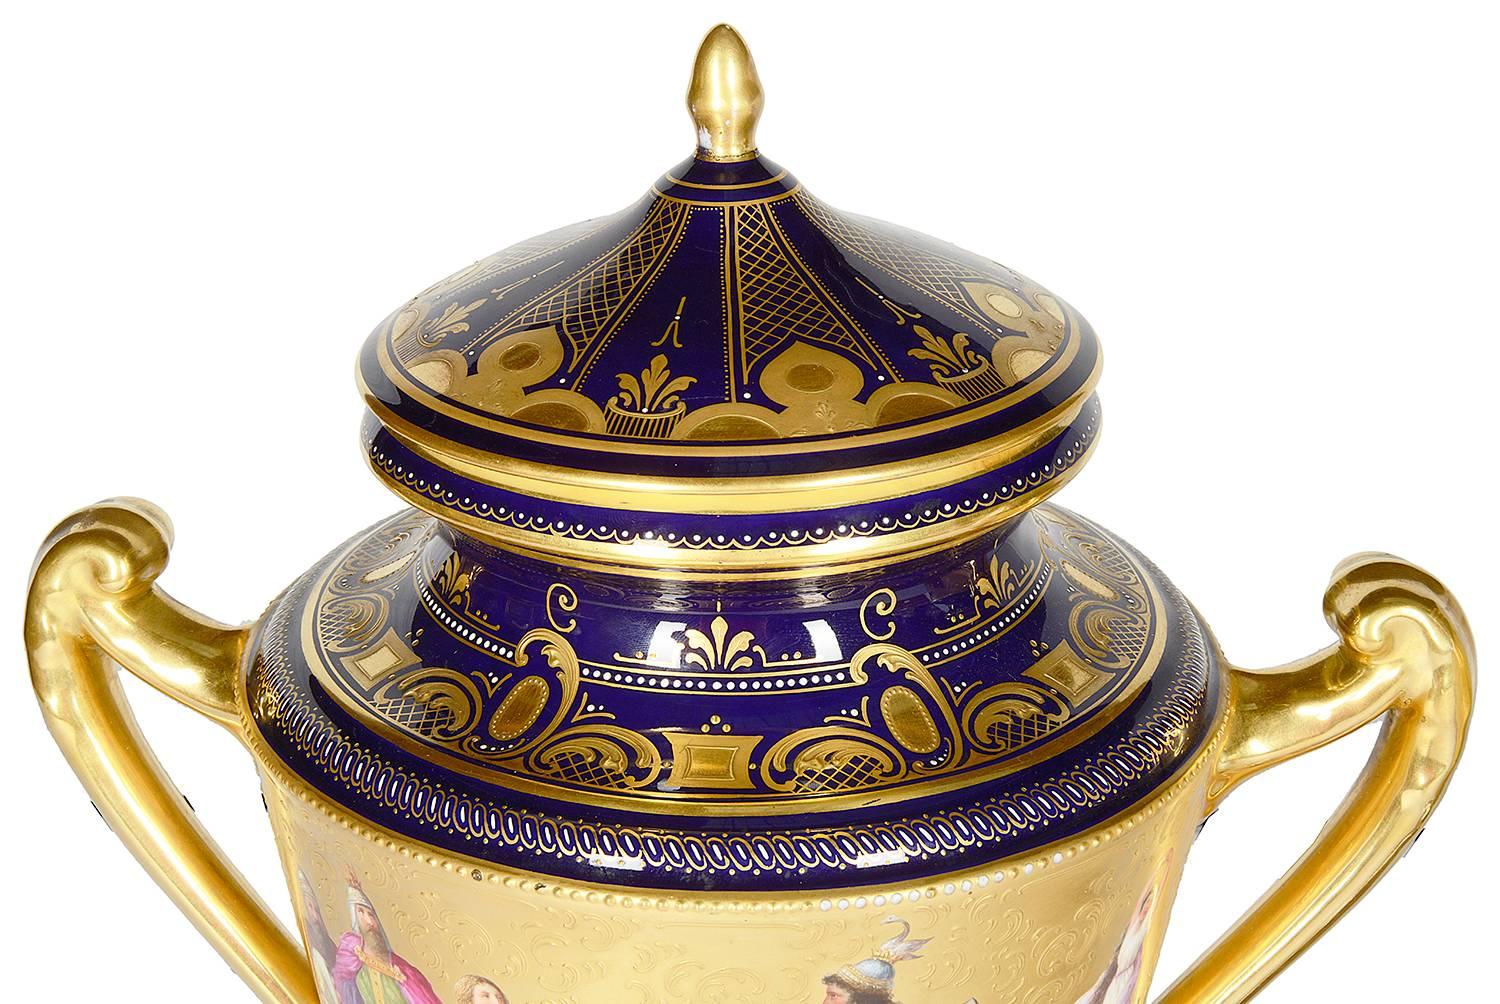 A very good quality pair of late 19th century Vienna porcelain lidded urns. Each with a cobalt blue ground, gilded scrolling boarders and romantic classical scenes.